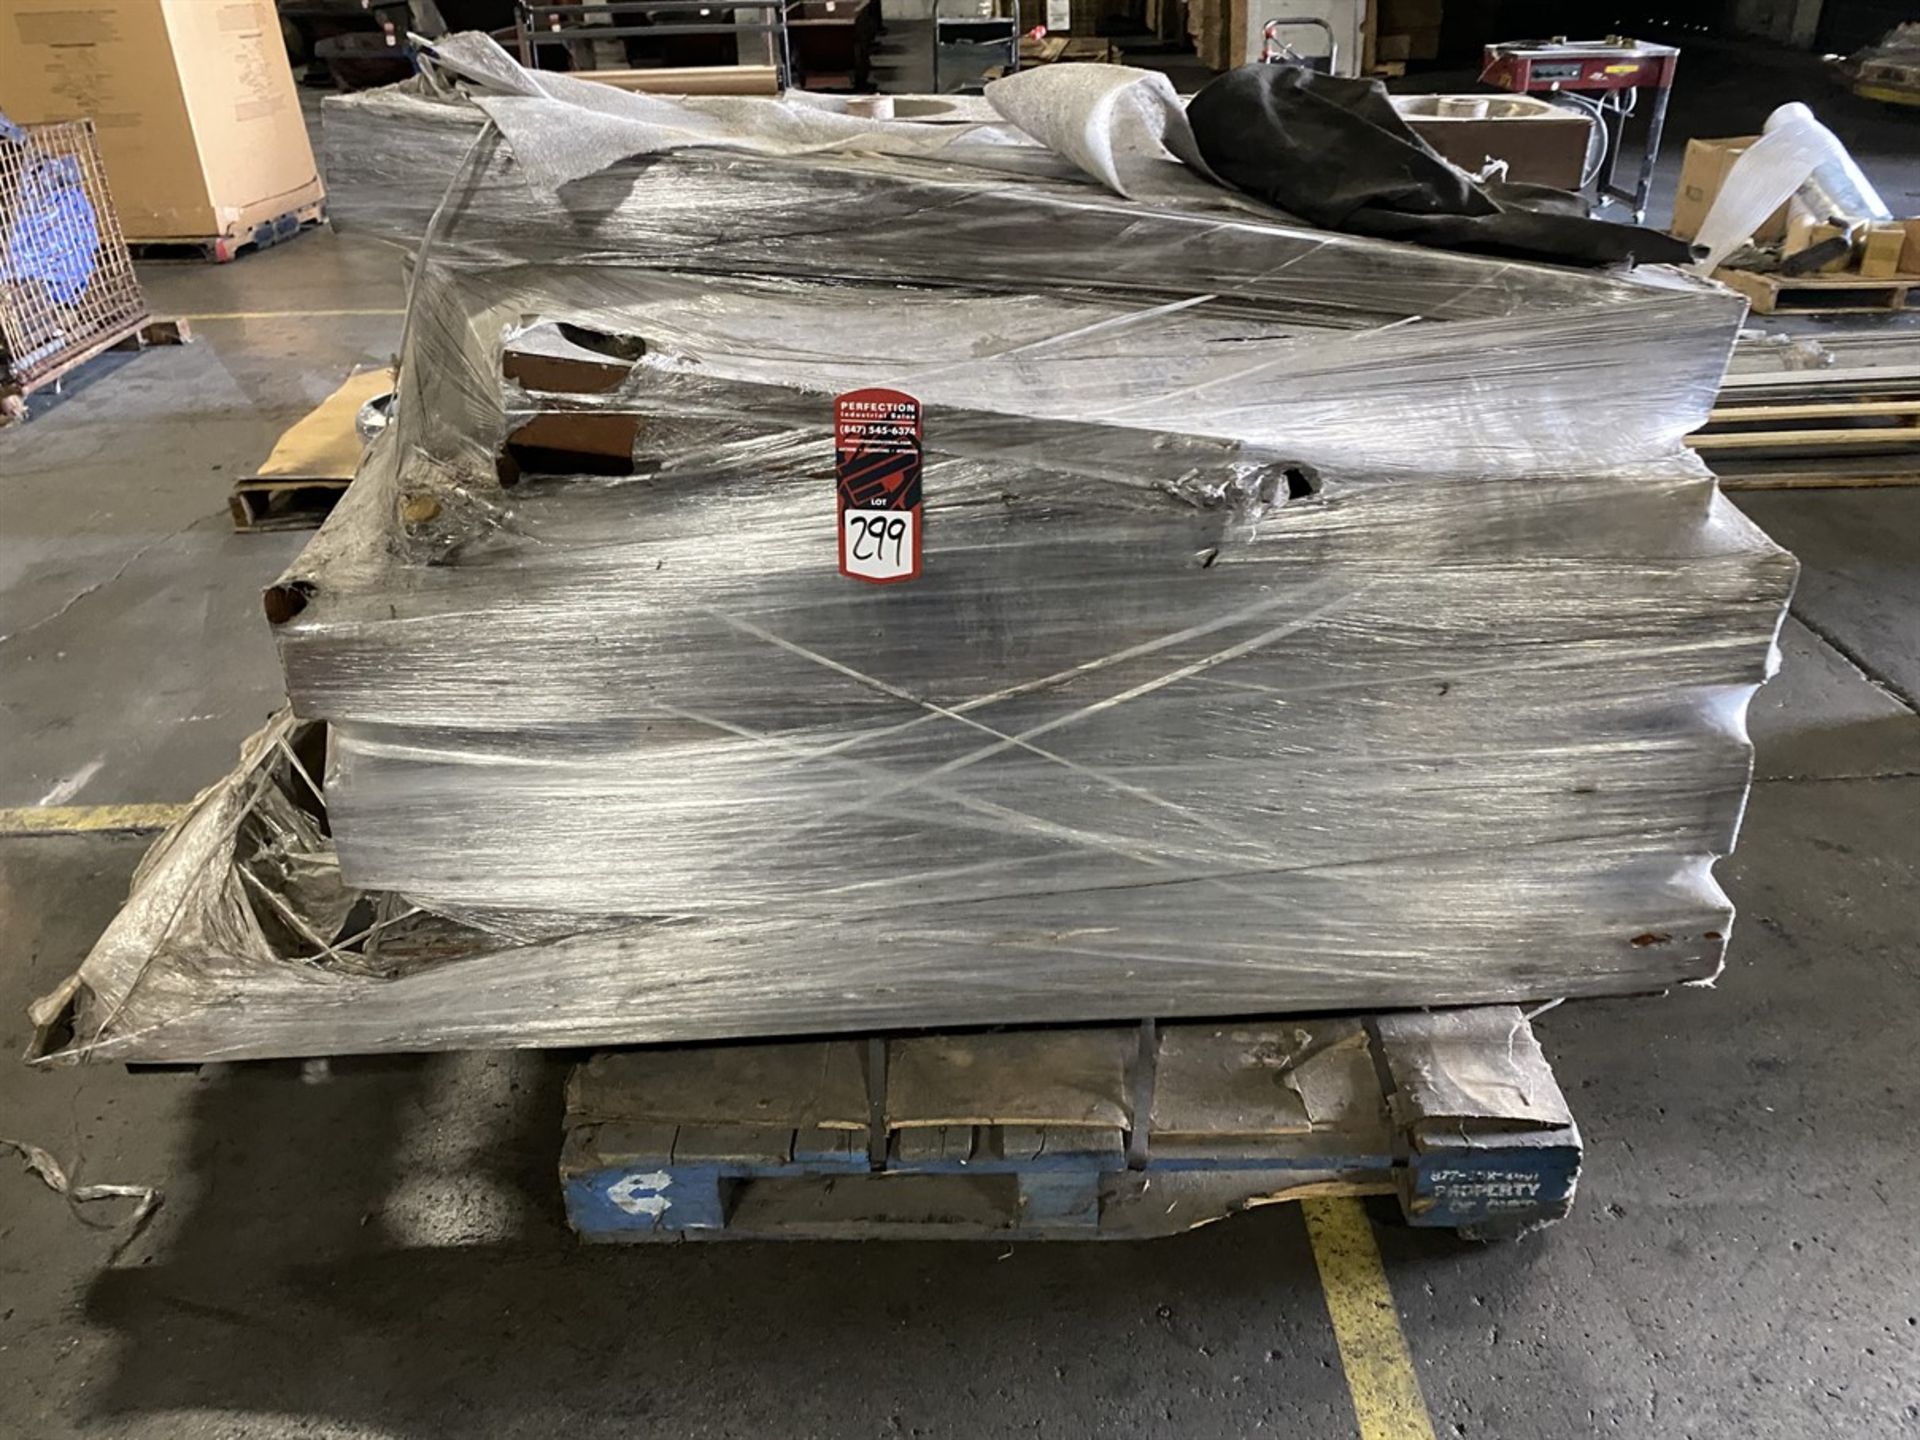 Pallet of Dryquick Heating Elements